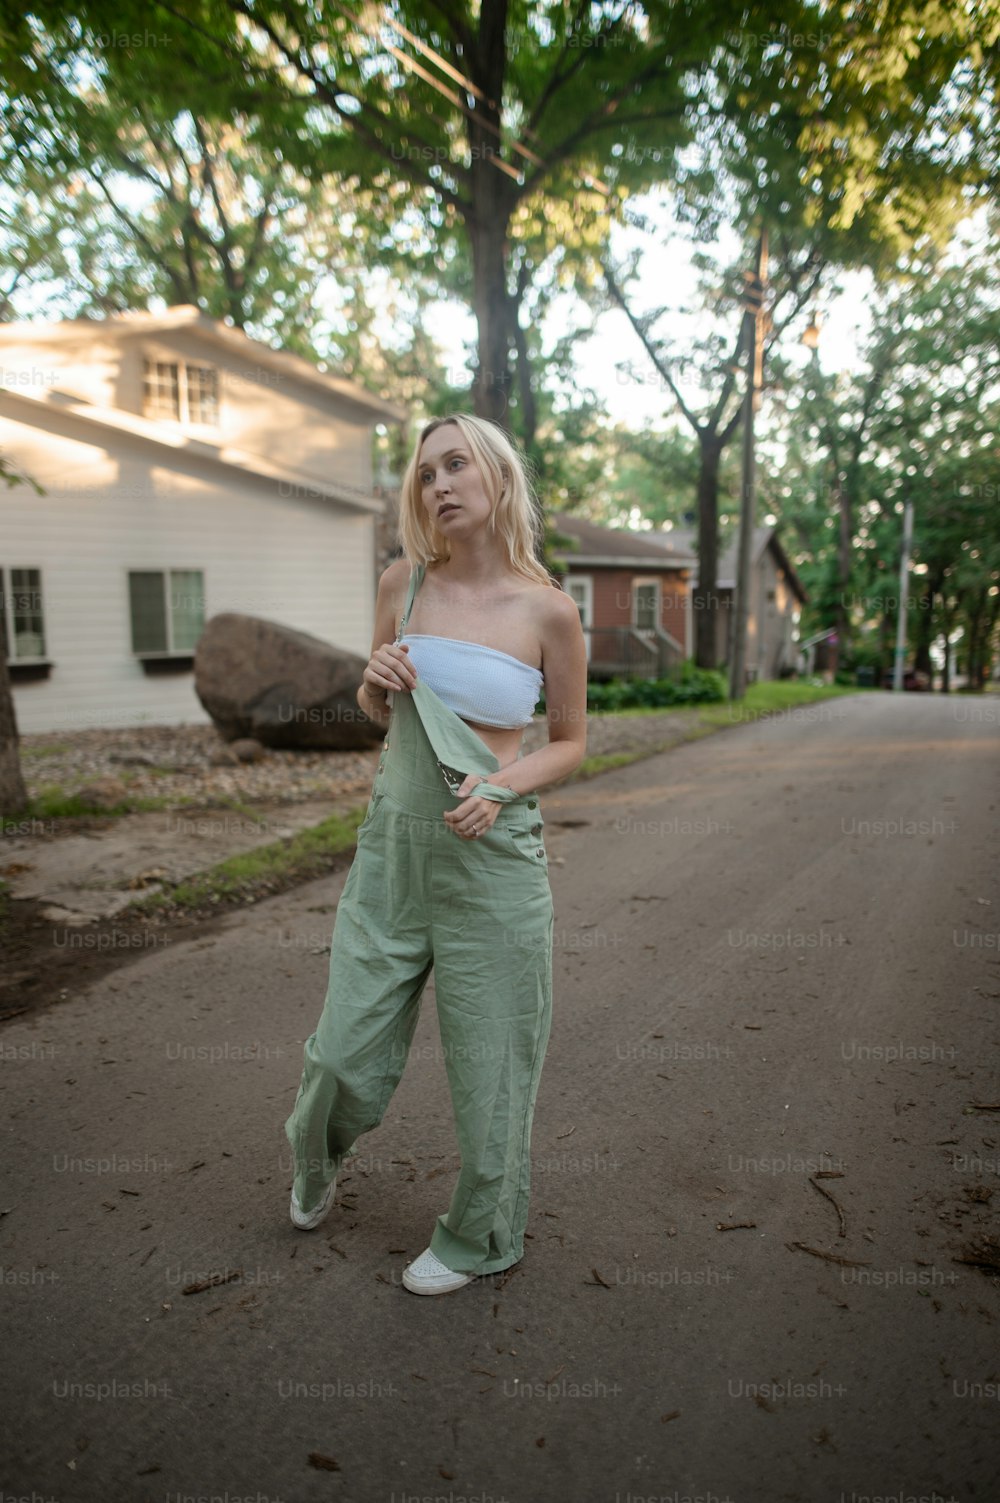 a woman in a white top and green pants